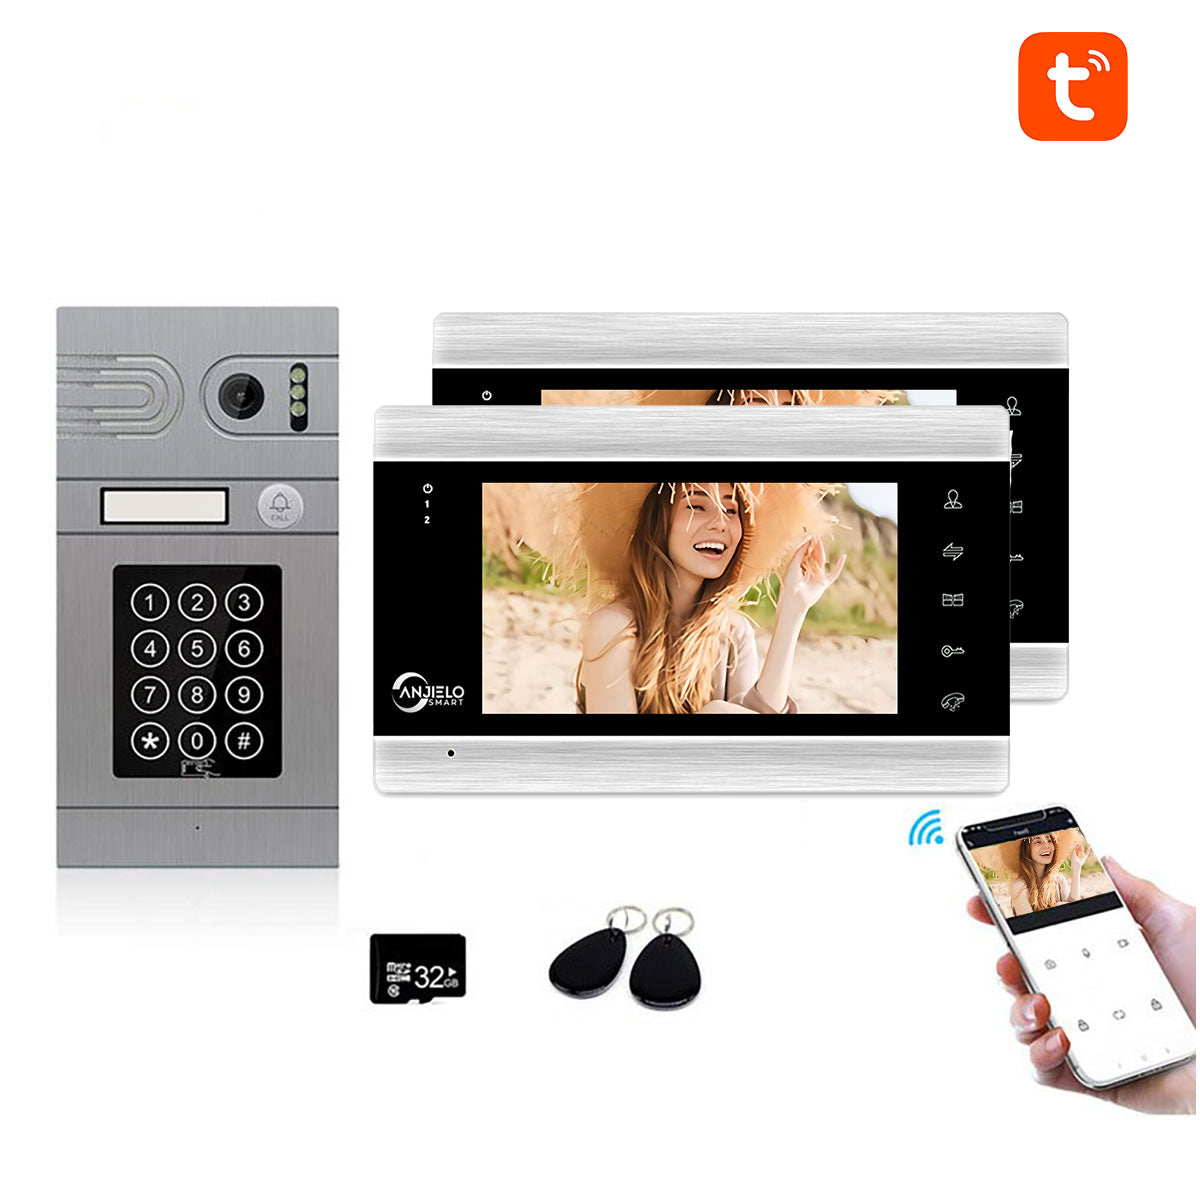 Tuya Smart App Remote Control WiFi Video Door Phone Intercom Access Control System Motion Detection With Code Keypad/RFID Card